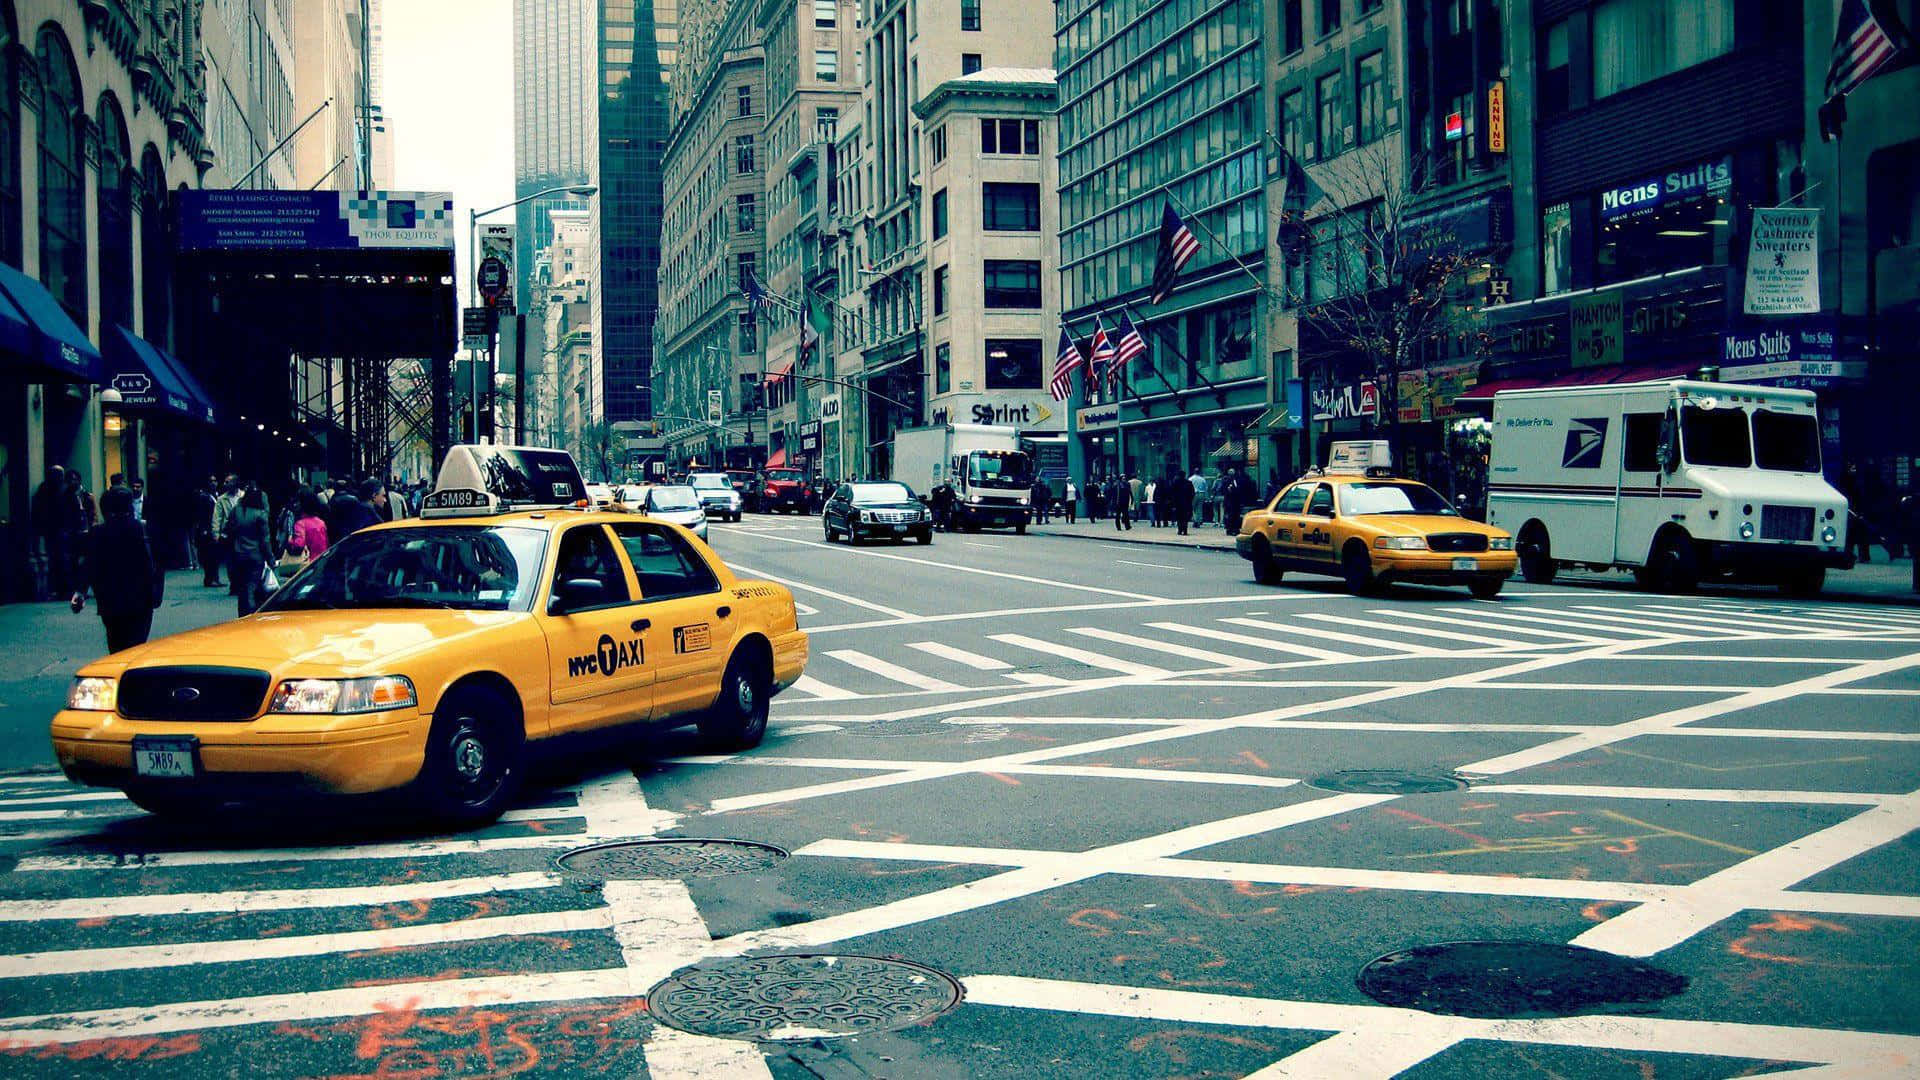 Vibrant Yellow Cab in the City Streets Wallpaper